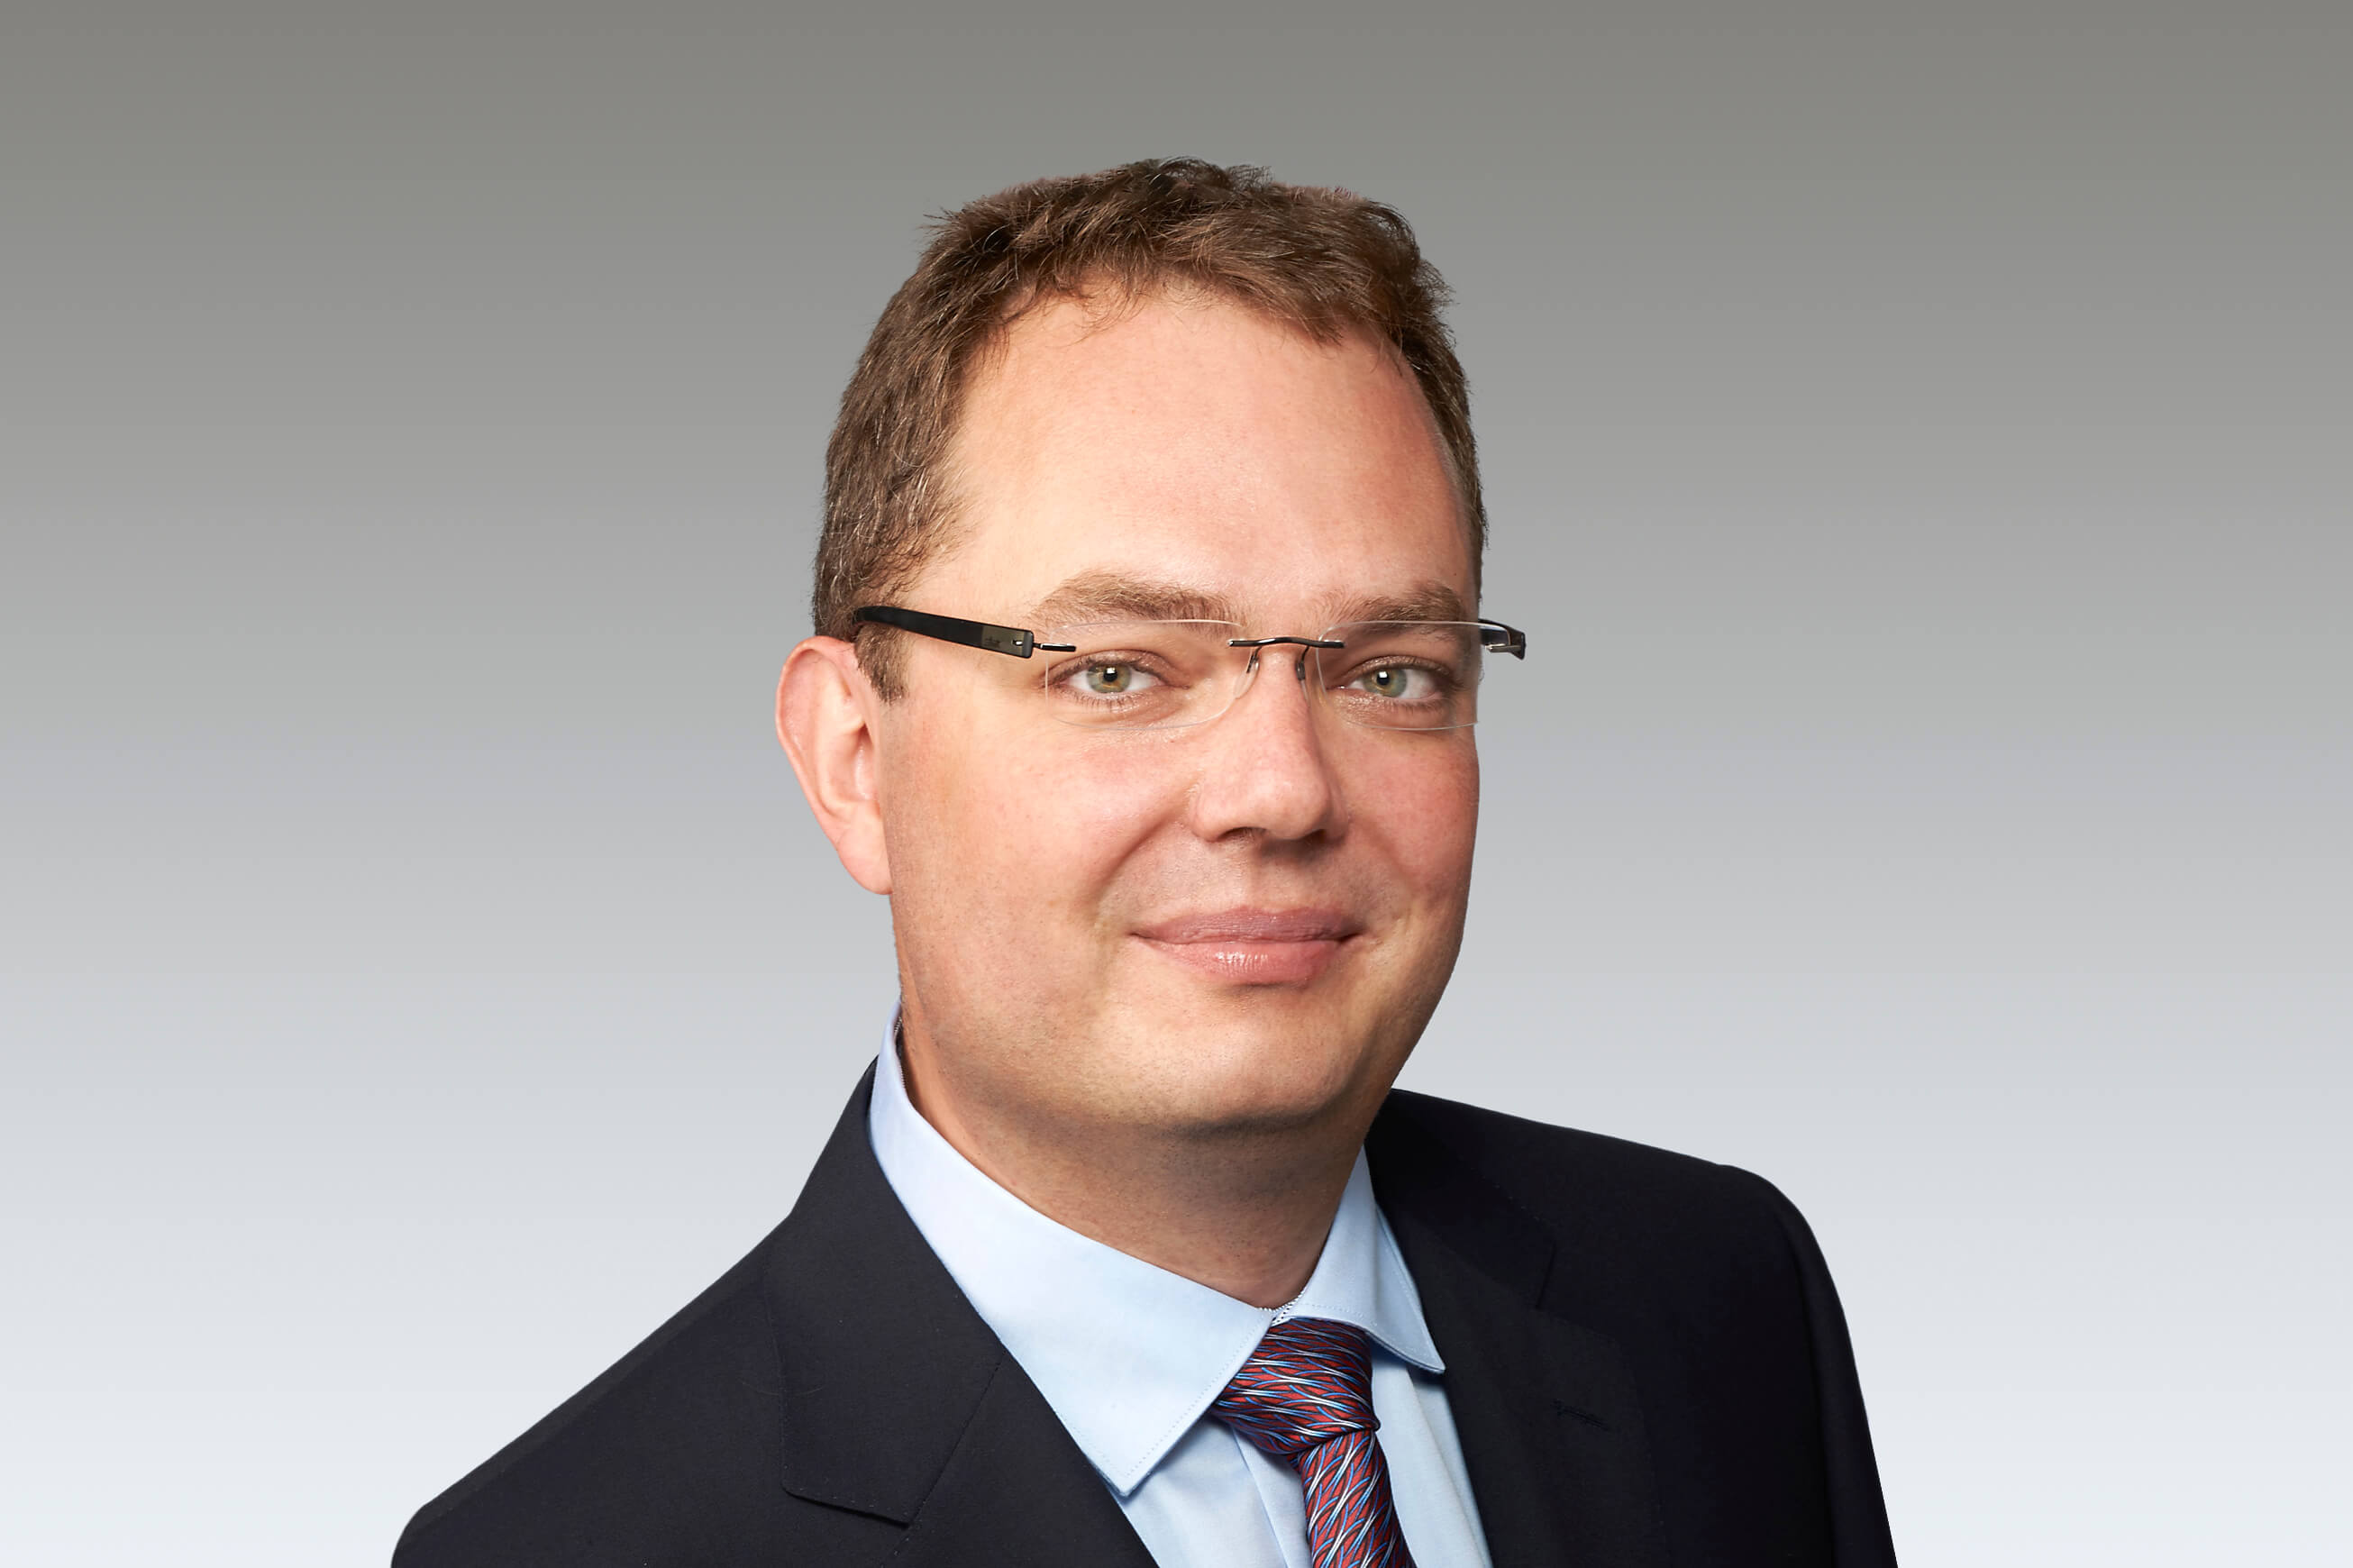 Dr Martin Leibfritz takes over as Managing Director